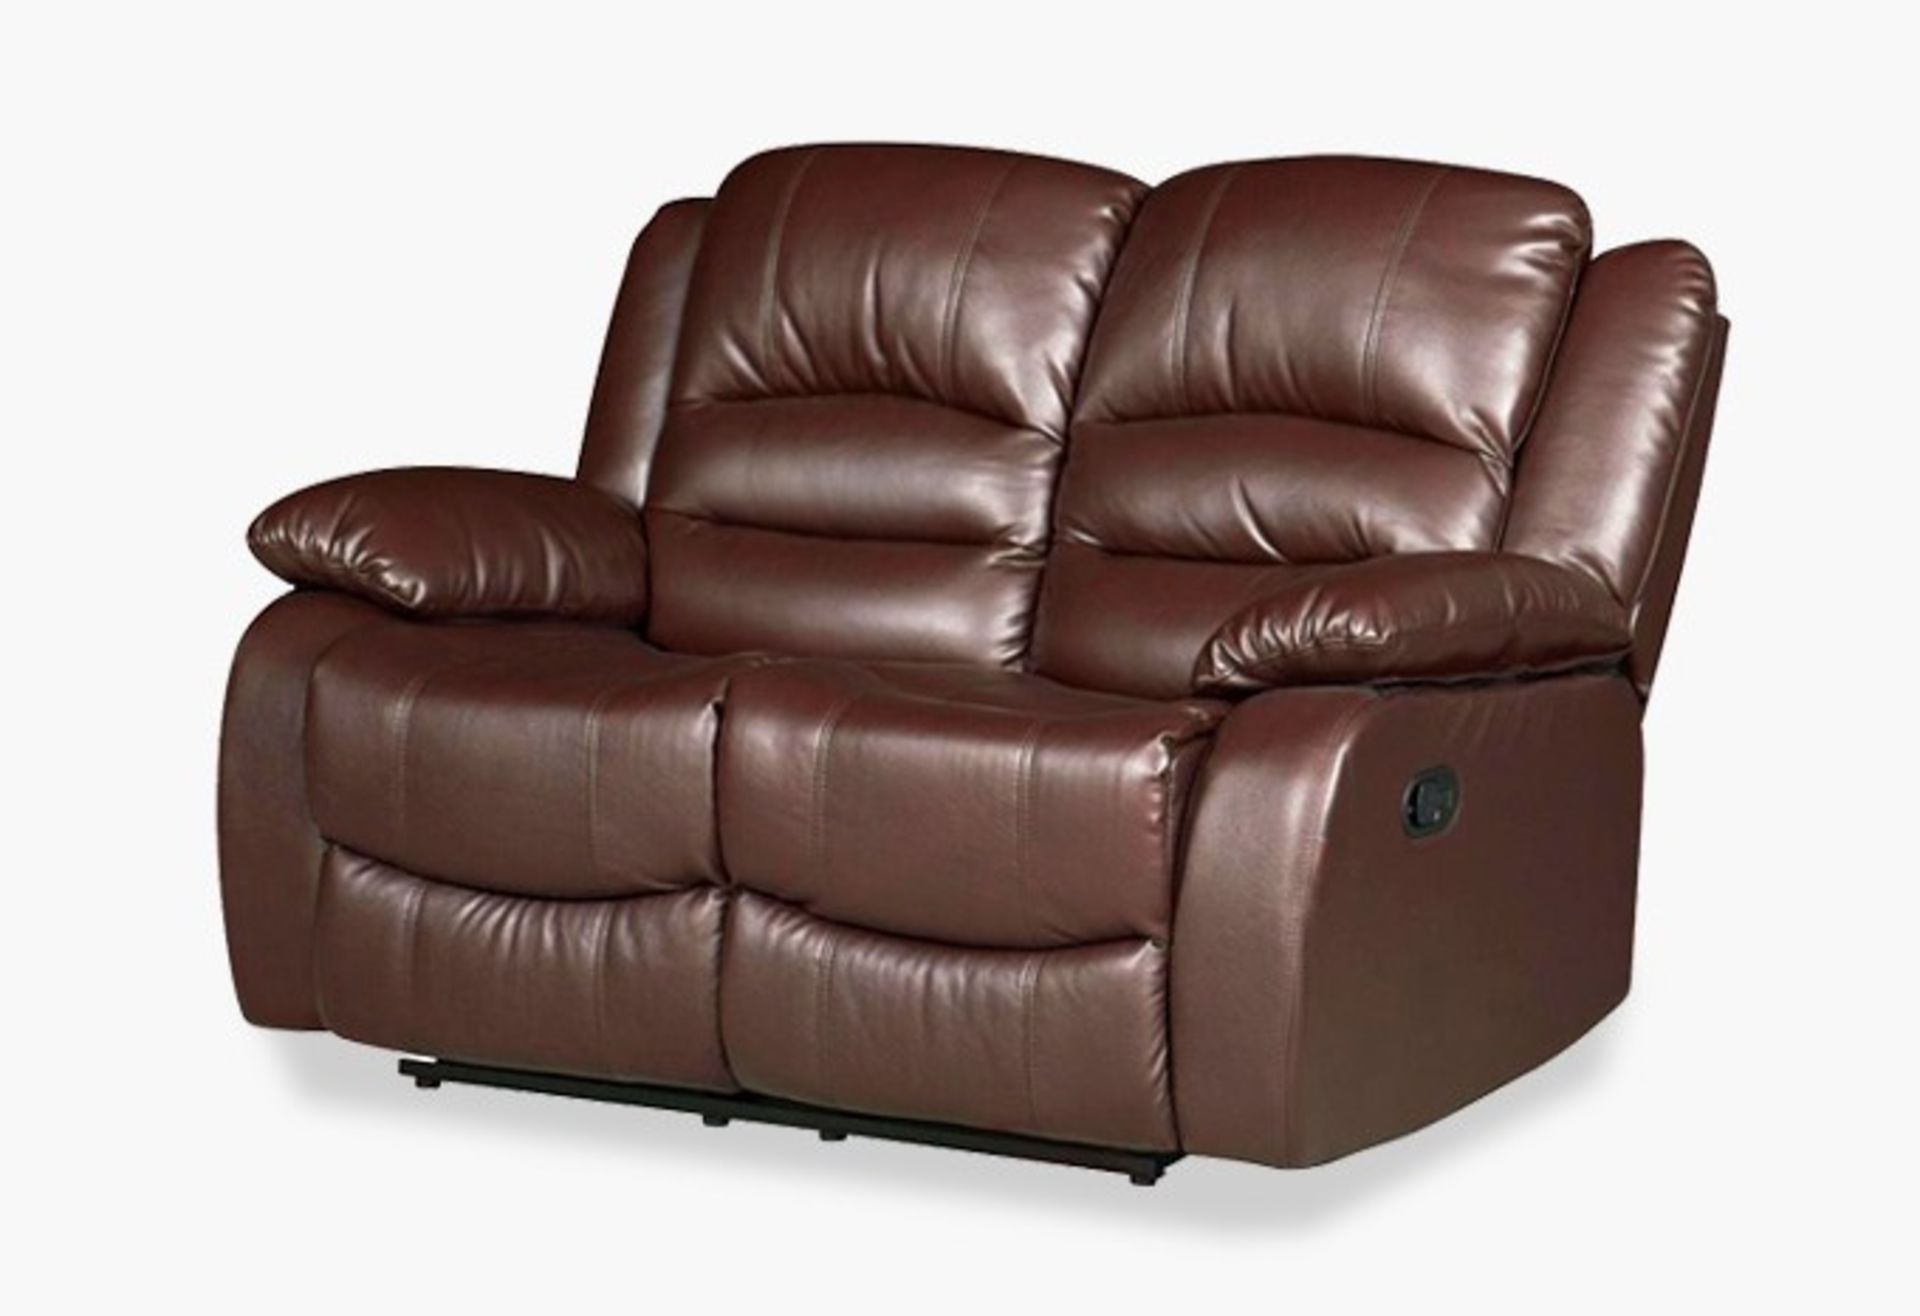 Brand new boxed direct from the manufacturers nice 3 seater manual and 2 seater electric reclining s - Image 2 of 2